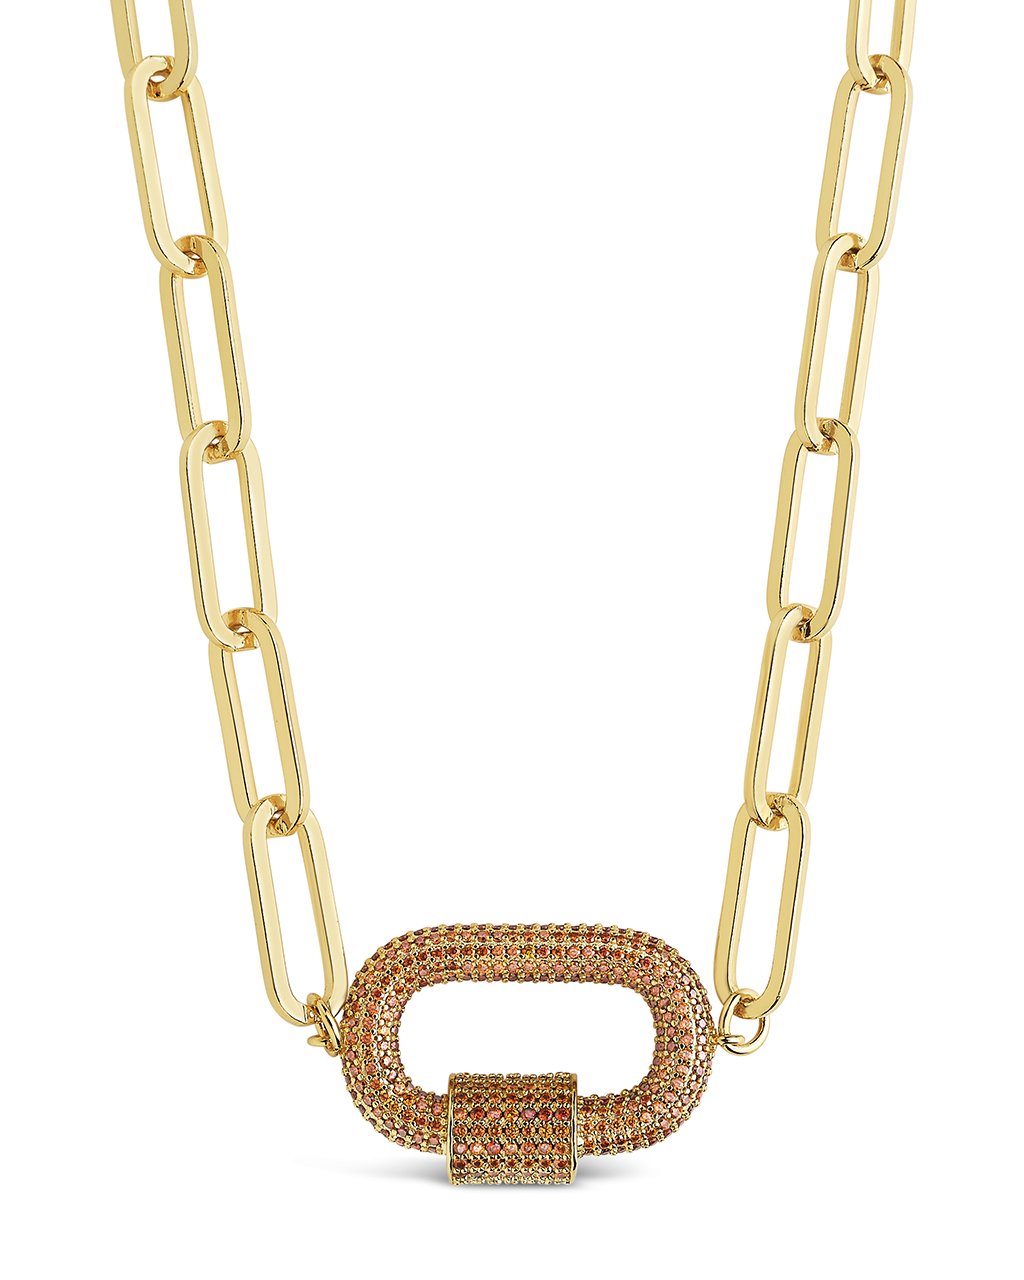 Braided Chain CZ Carabiner Necklace - Gold Leaf